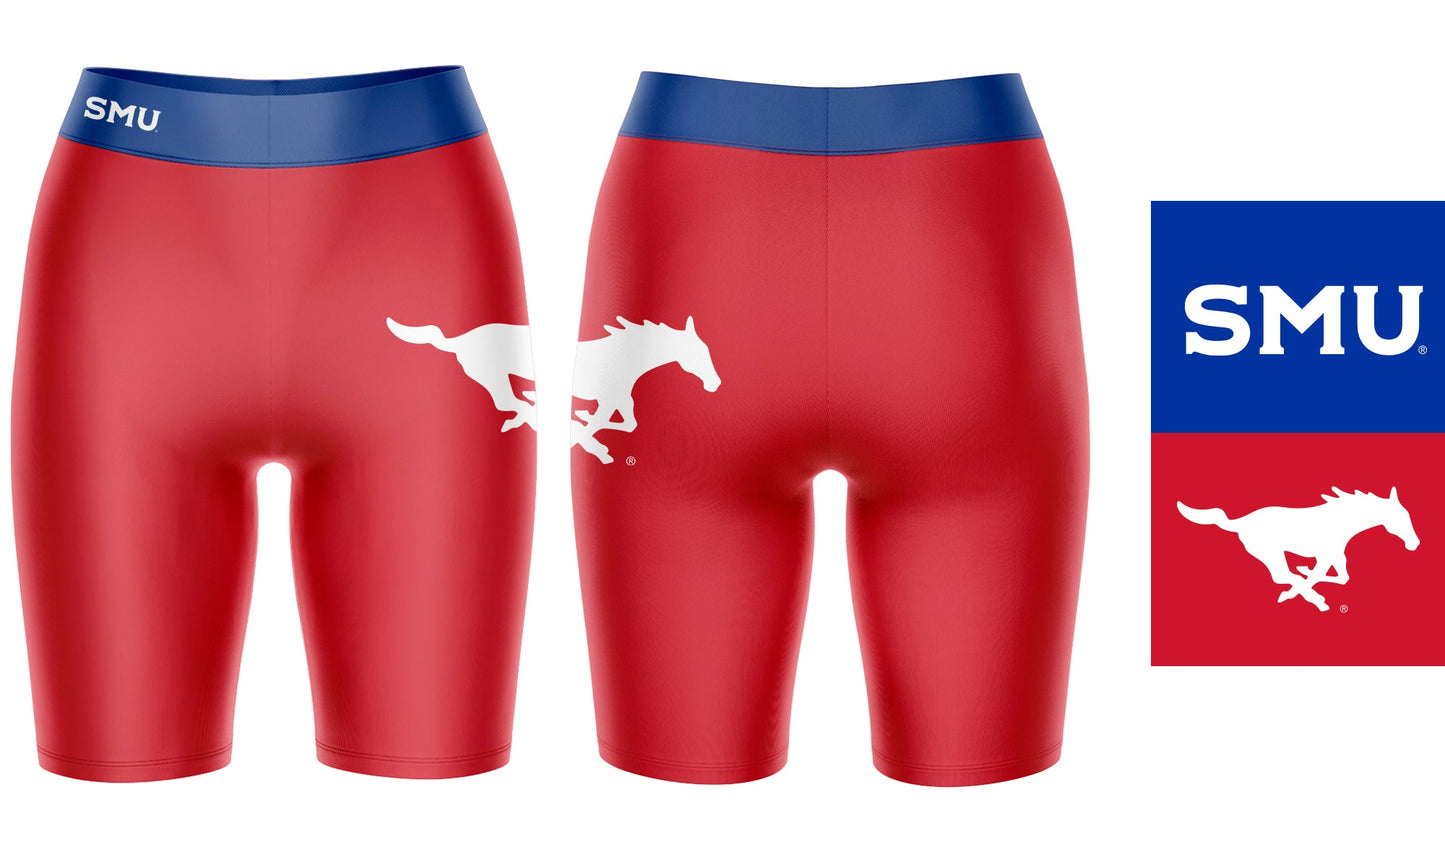 SMU Mustangs Vive La Fete Game Day Logo on Thigh and Waistband Red and Blue Women Bike Short 9 Inseam